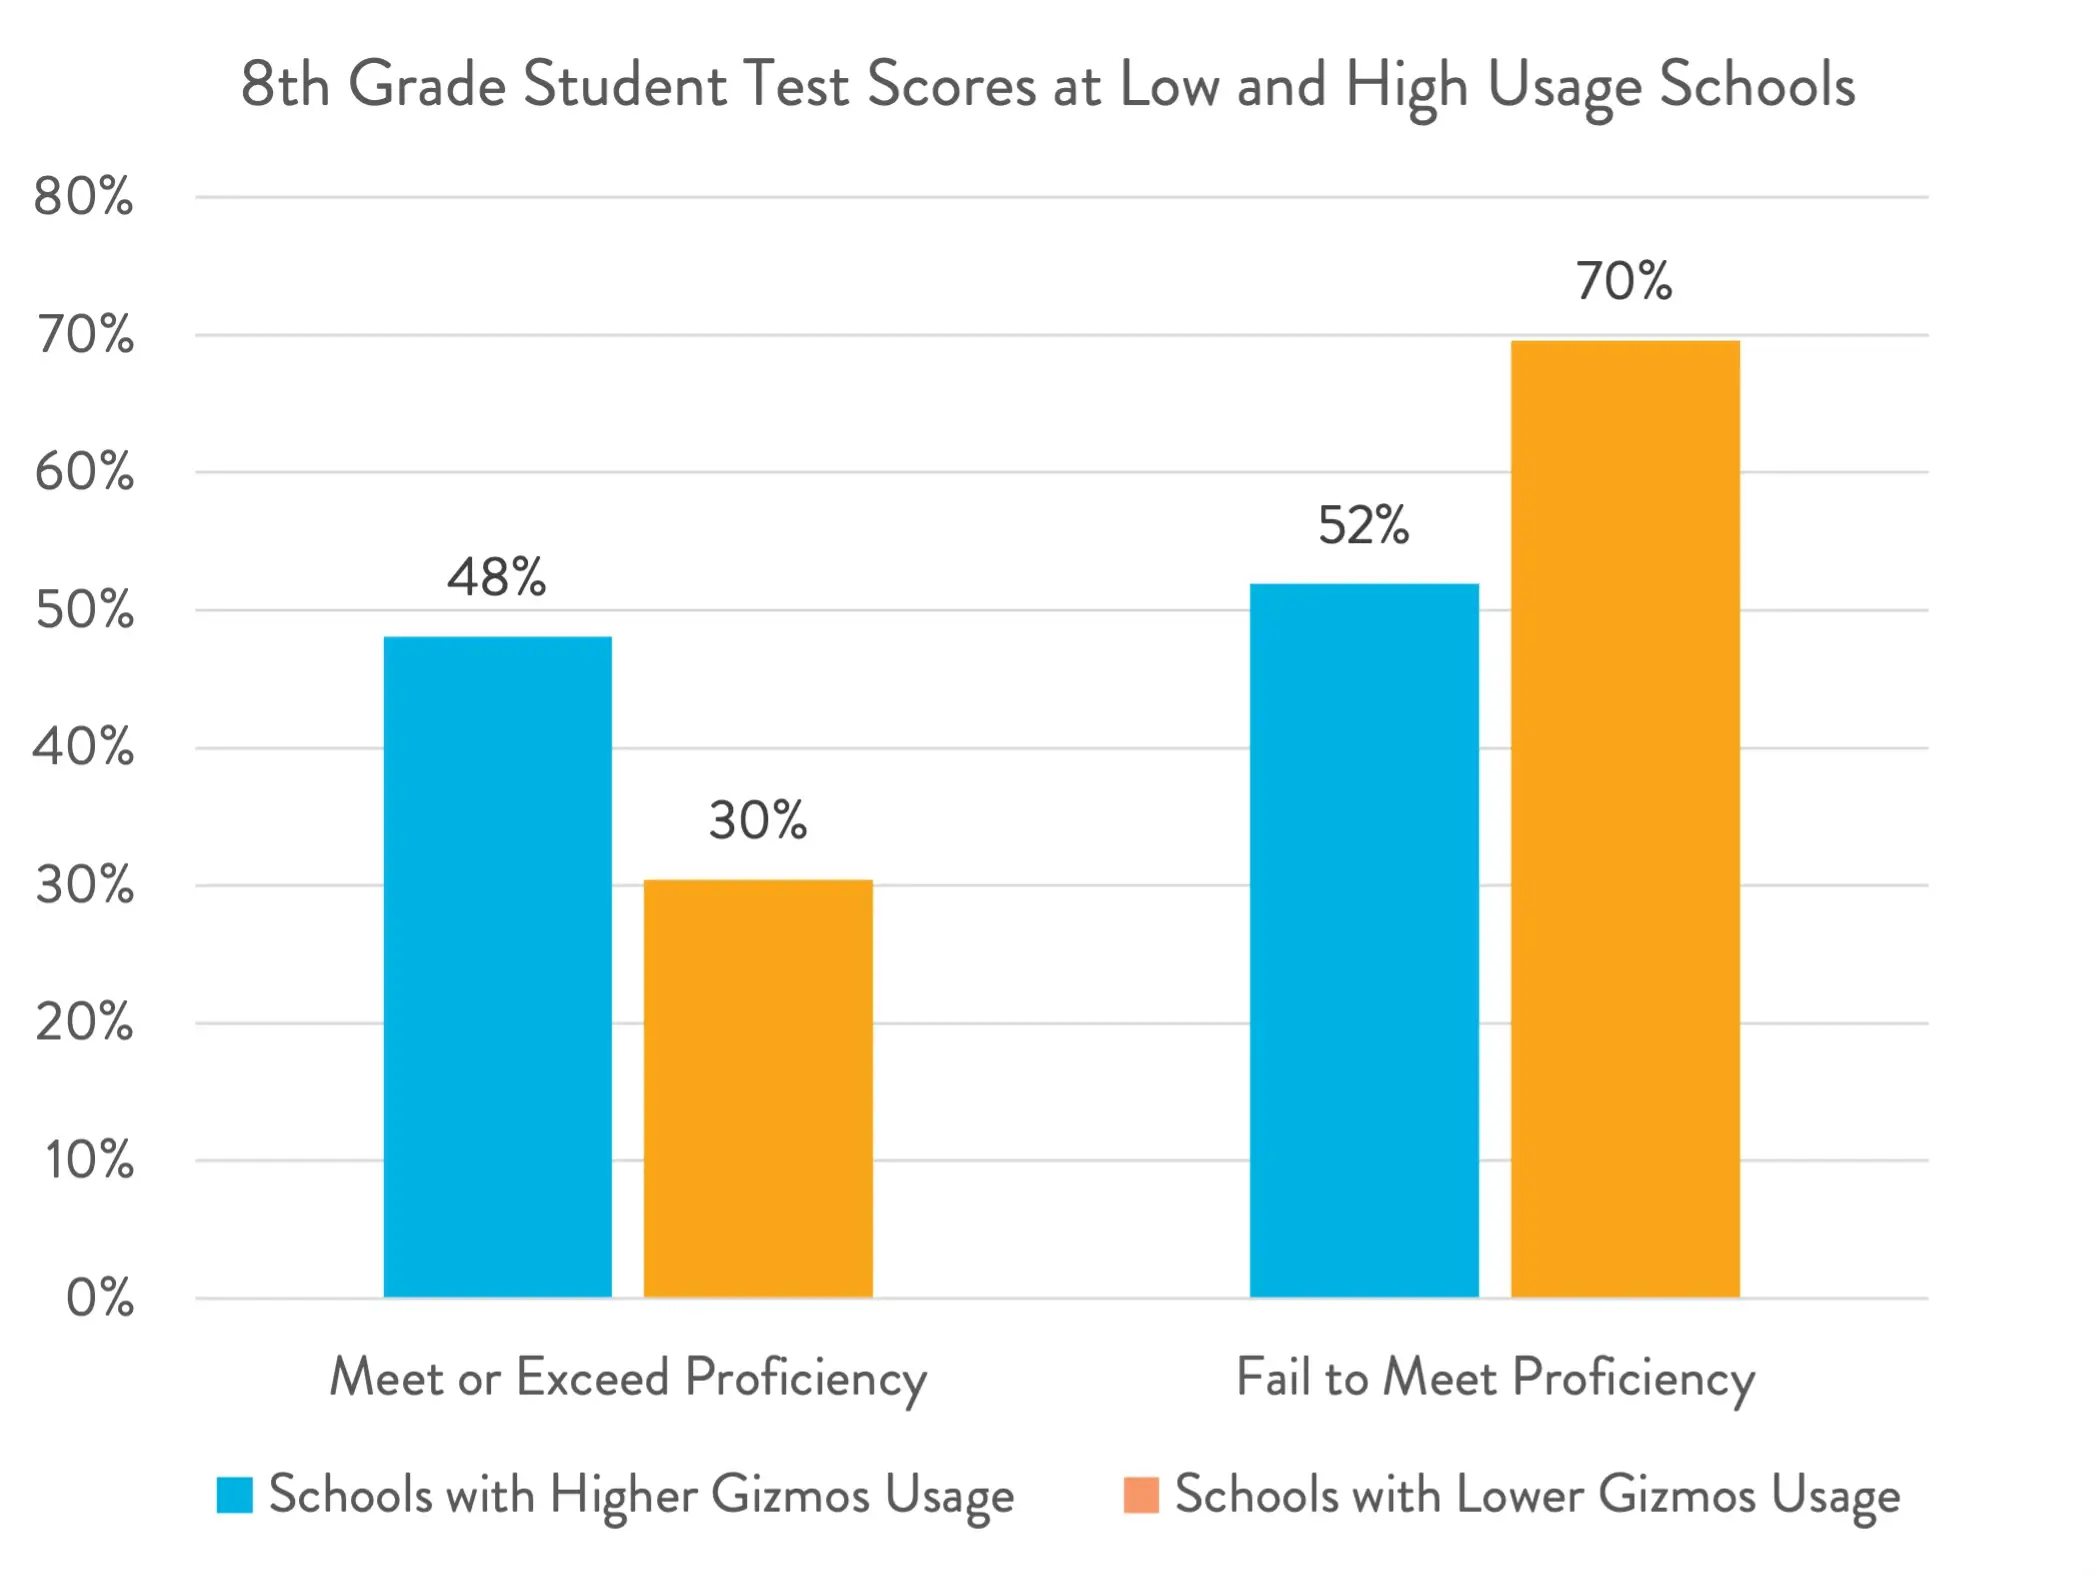 8th-grade students at schools with higher Gizmos usage were 1.6x more likely to meet or exceed test proficiency standards than those with lower Gizmos usage.